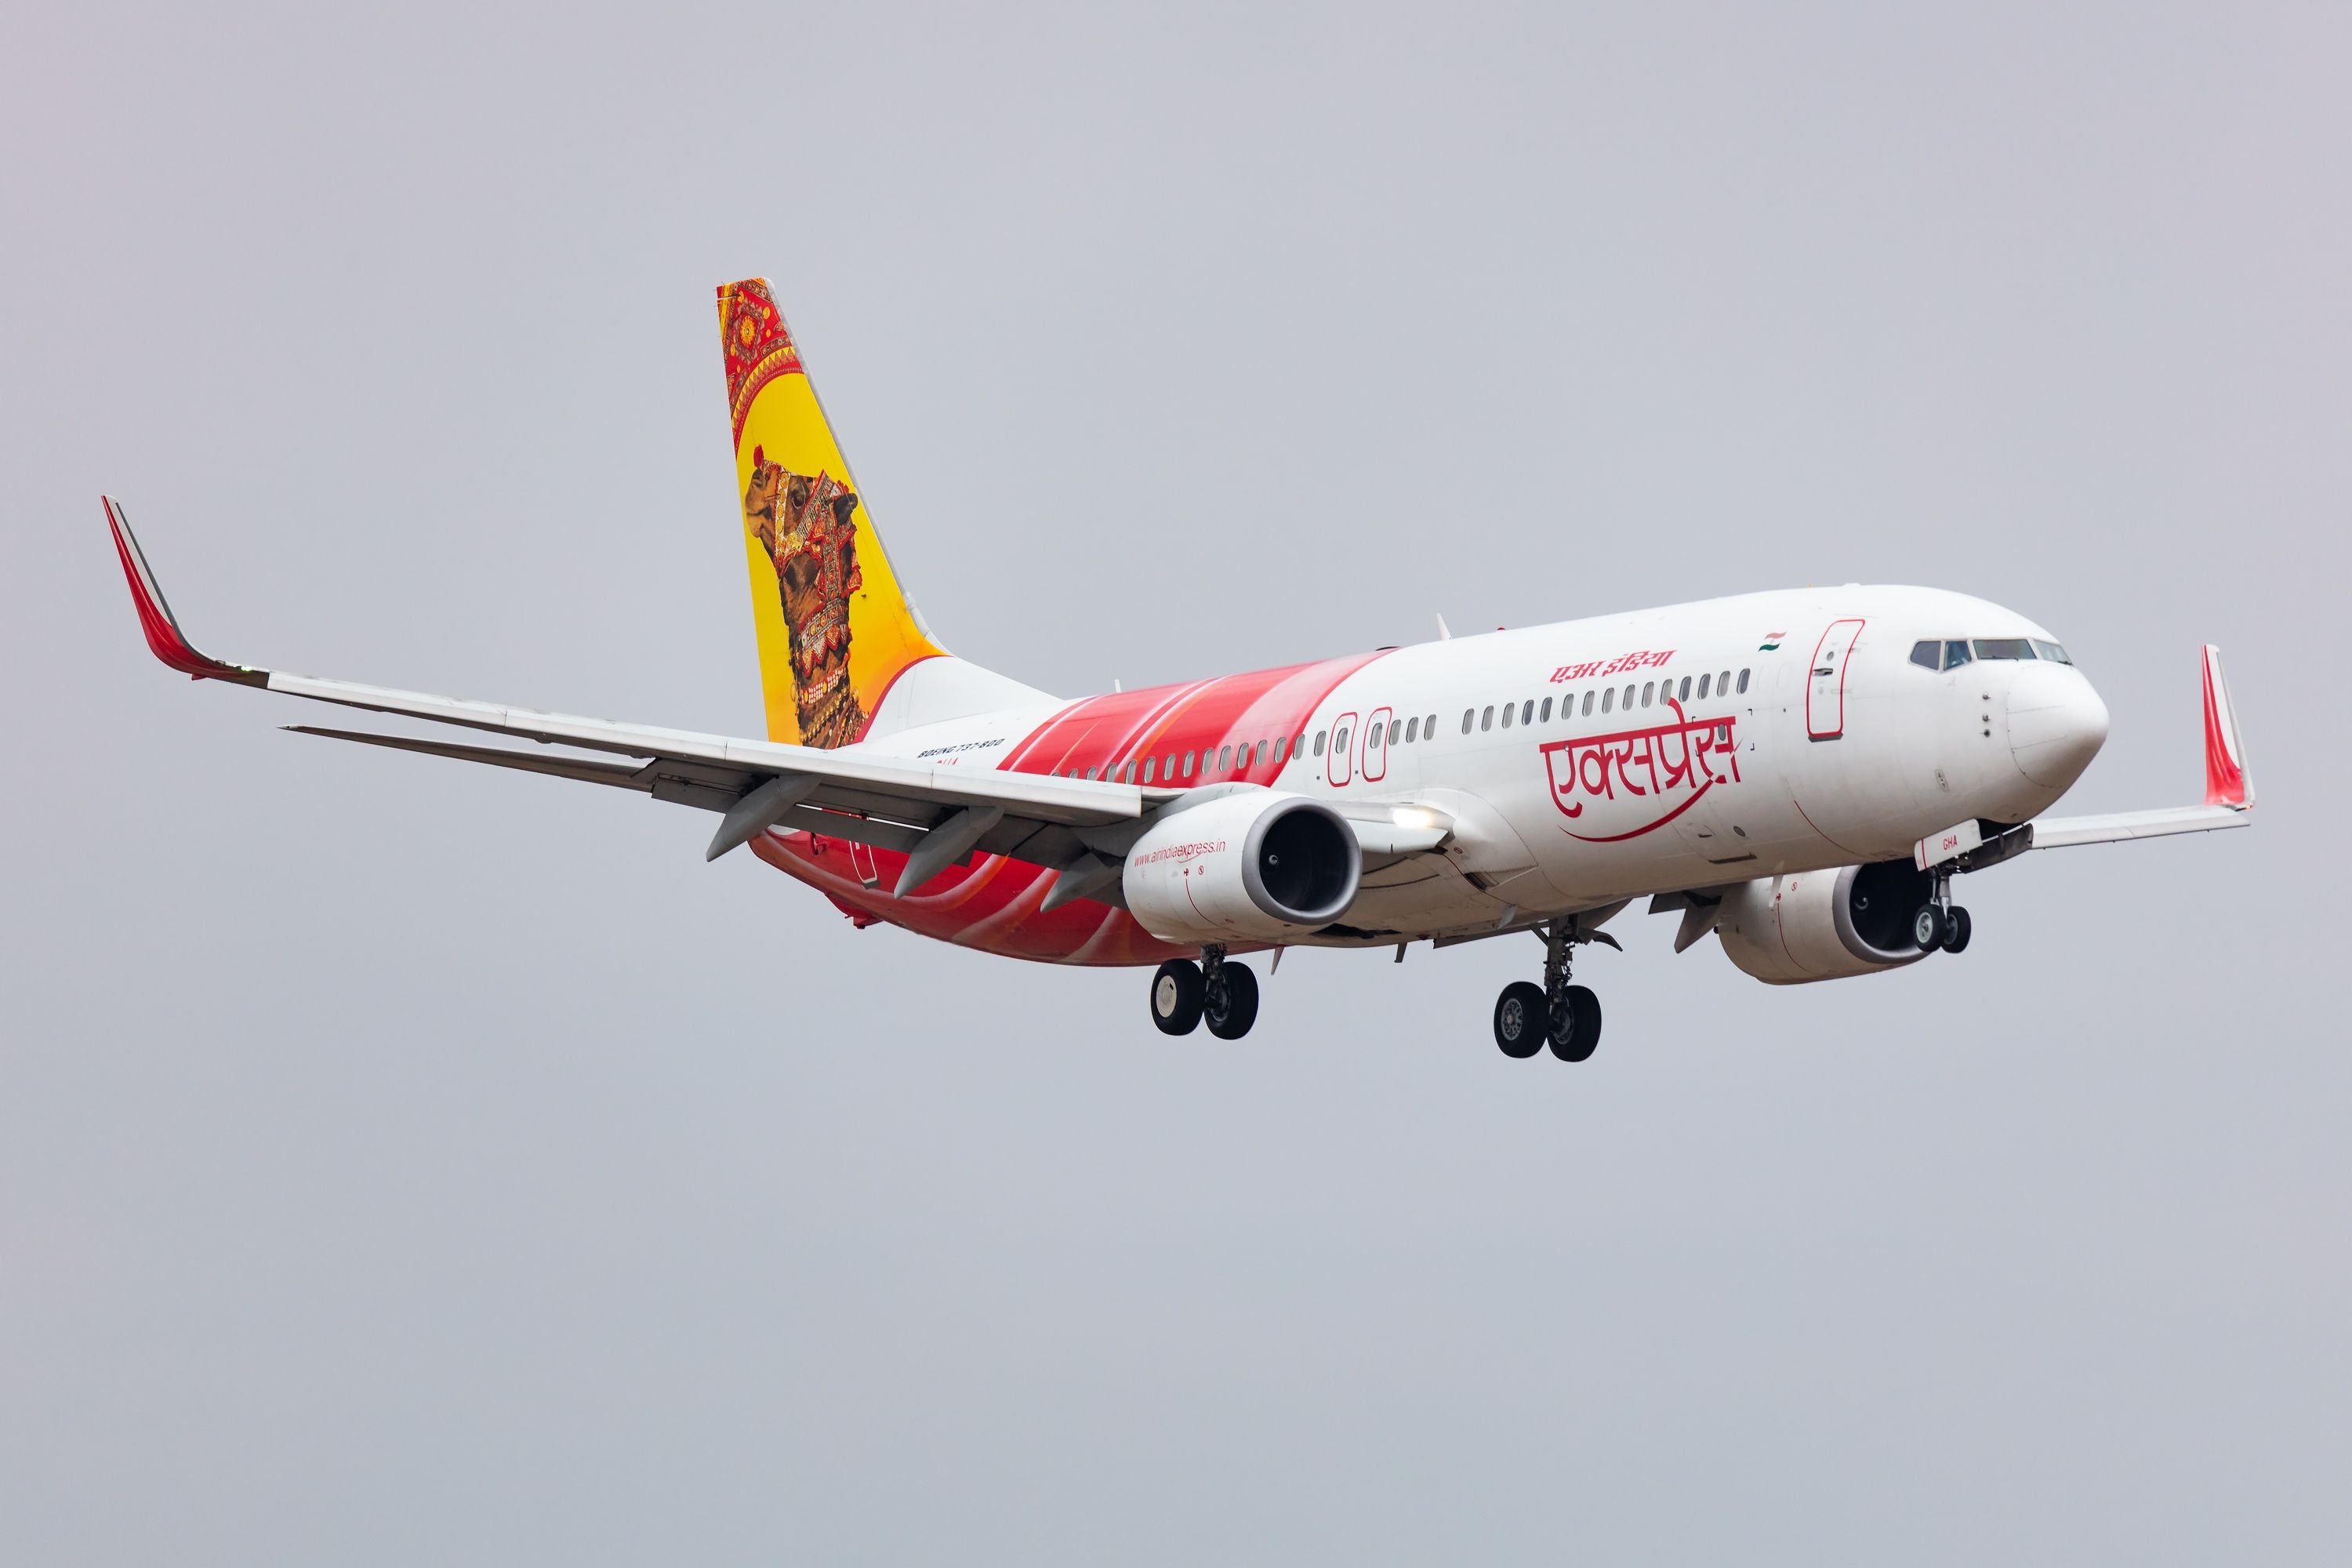 Air India Express Boeing 737-800